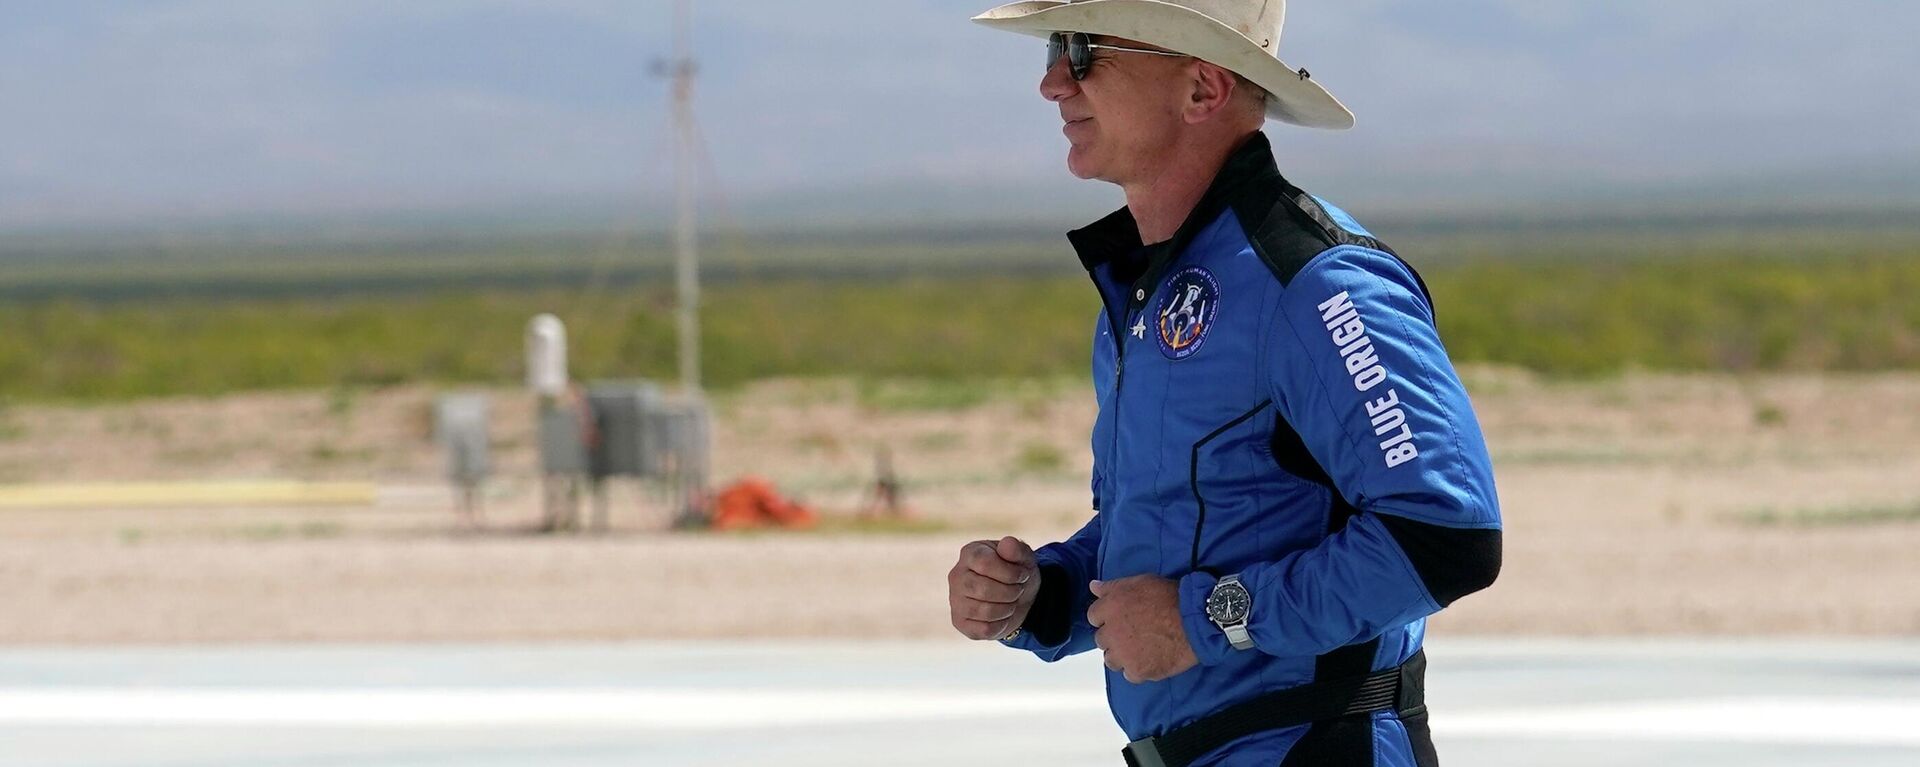 Jeff Bezos, founder of Amazon and space tourism company Blue Origin jogs onto the Blue Origin's New Shepard rocket landing pad to pose for photos at the spaceport near Van Horn, Texas, Tuesday, July 20, 2021.  - Sputnik International, 1920, 12.07.2023